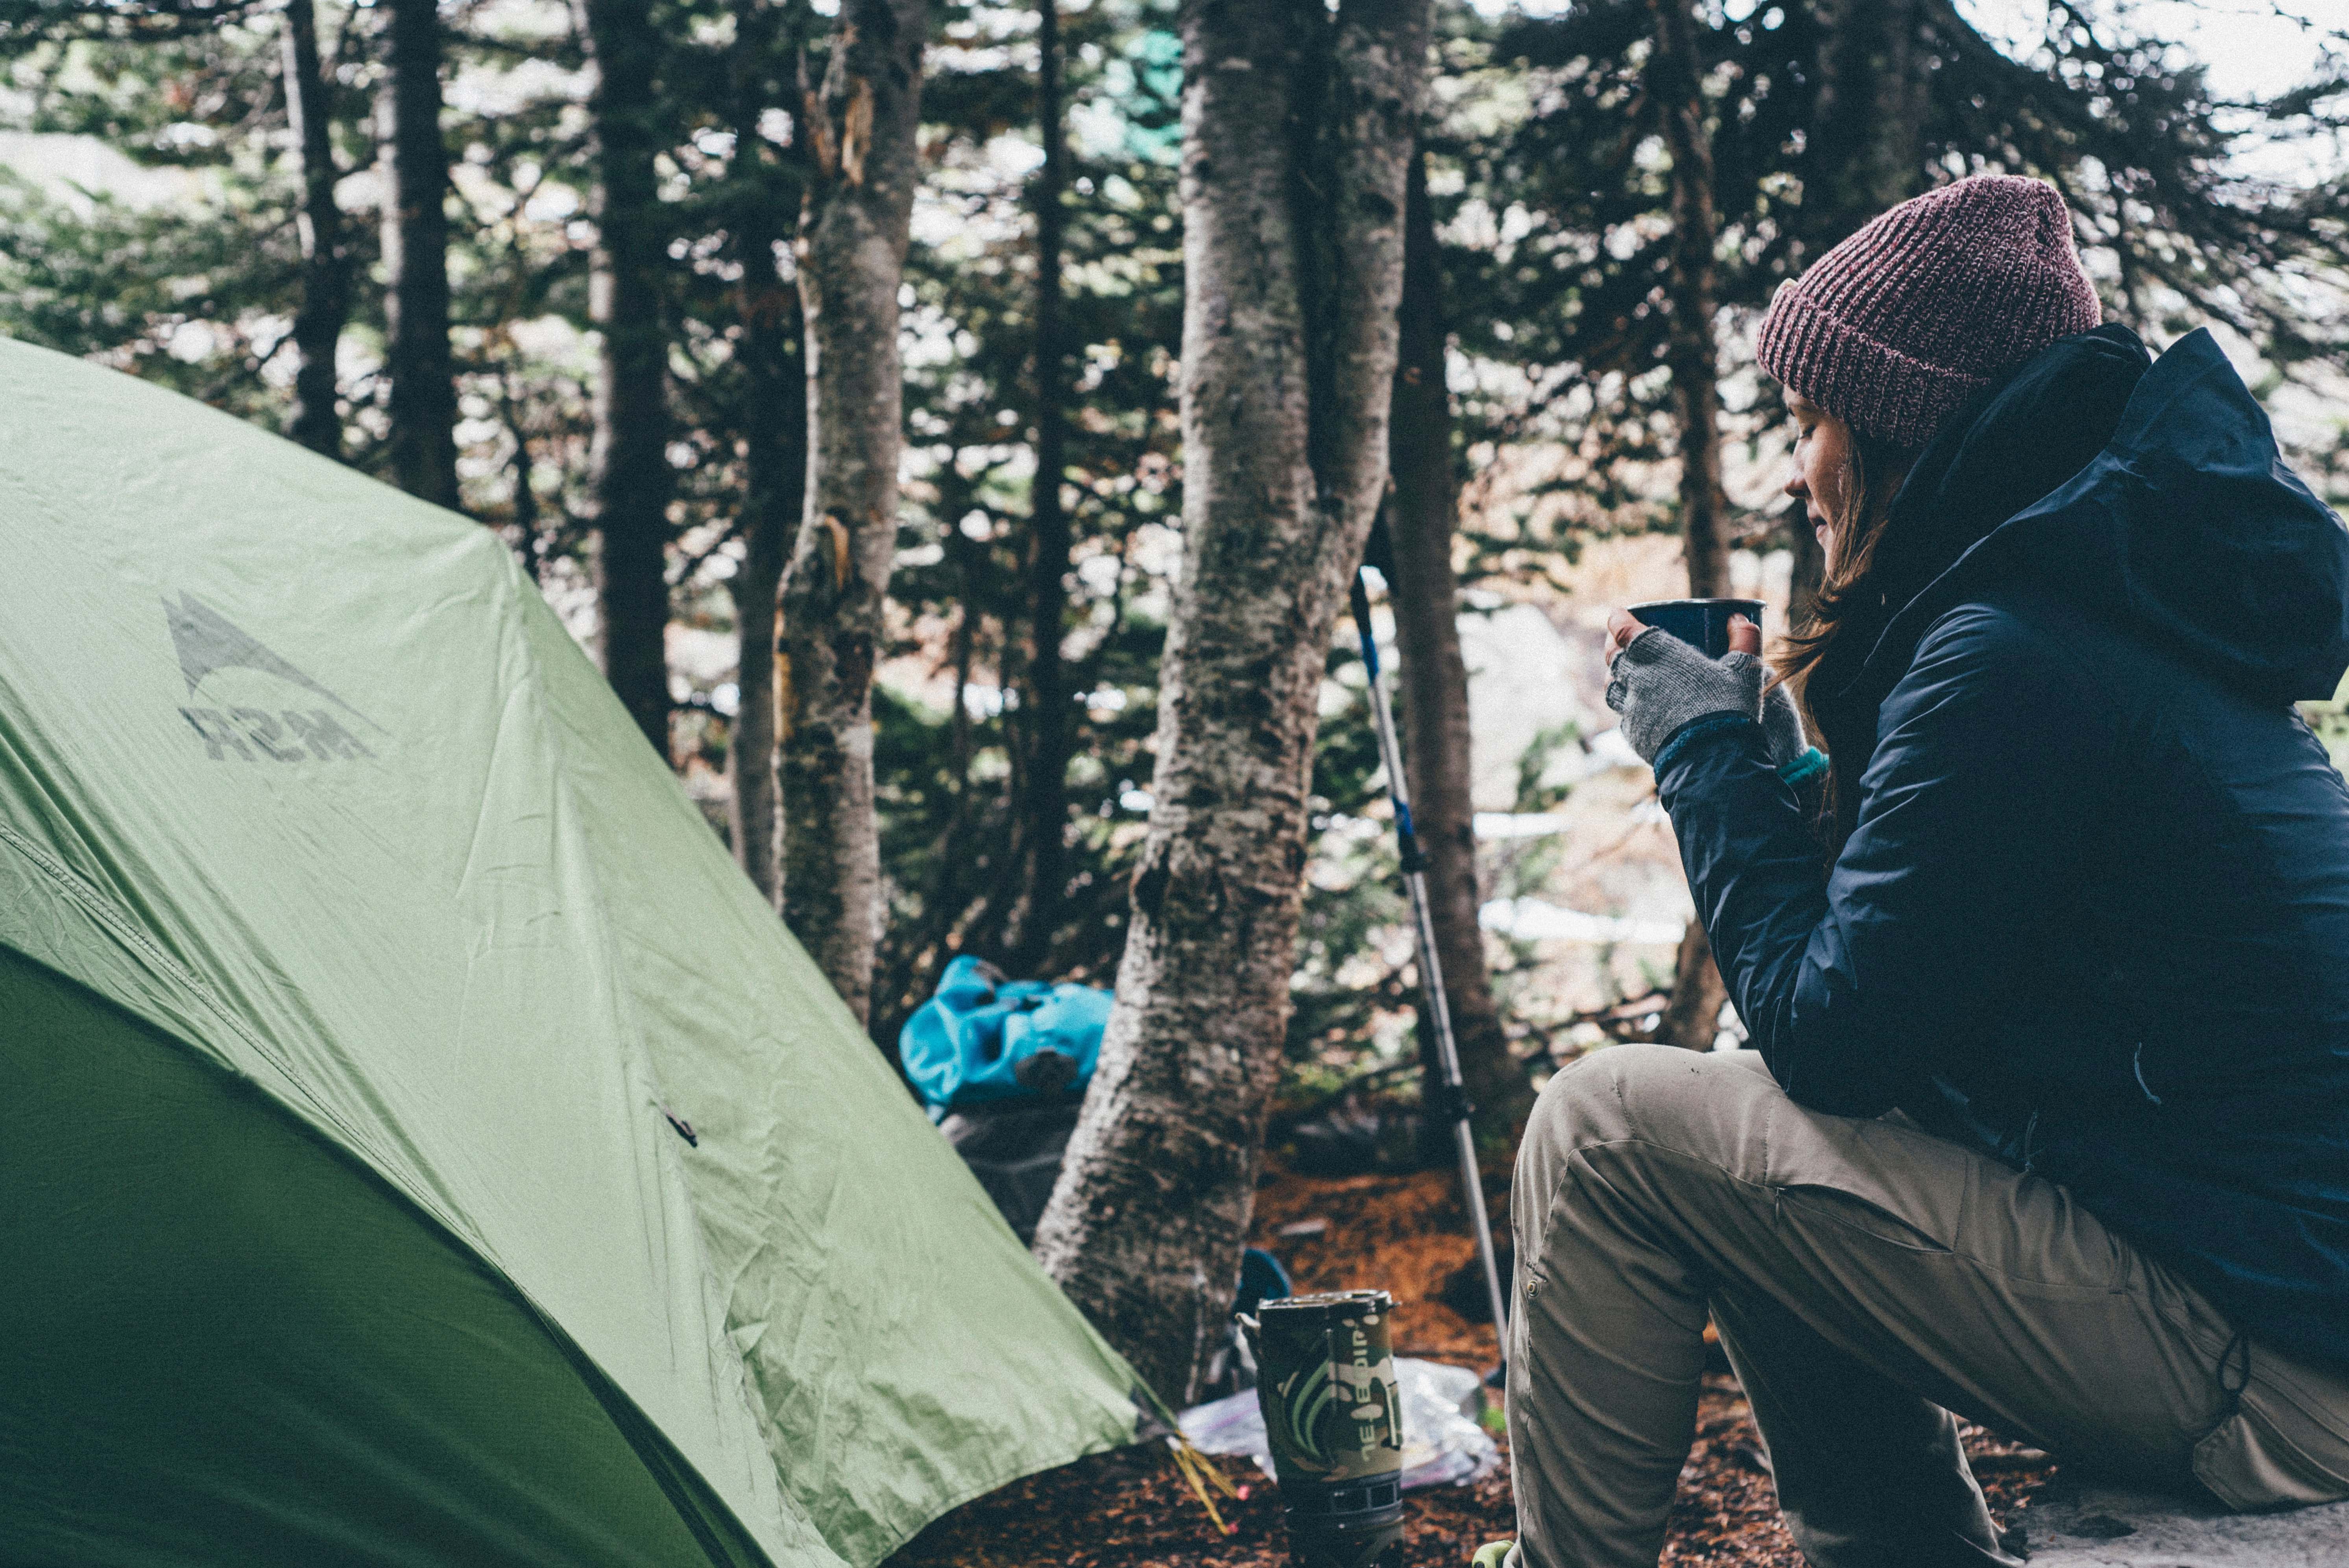 People Woman Sitting And Holding Cup Of Coffee Camping Image Free Photo